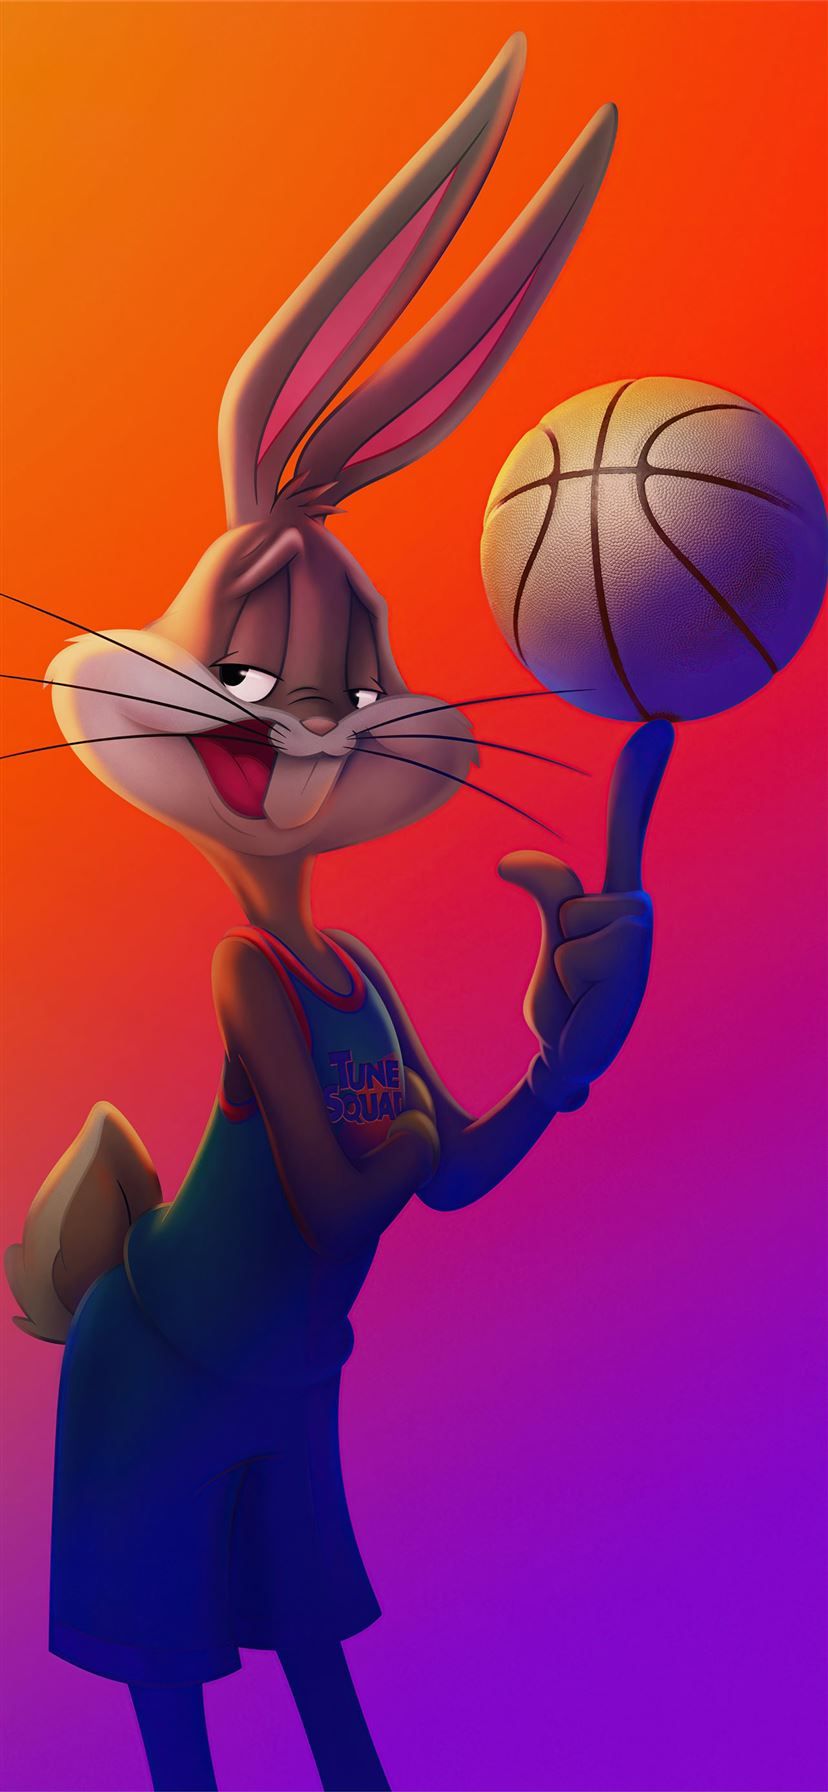 Free download the bugs bunny space jam a new legacy 8k wallpaper , beaty your iphone. #Space Jam A Ne. Bunny wallpaper, Bugs bunny wallpaper, Bugs bunny space jam